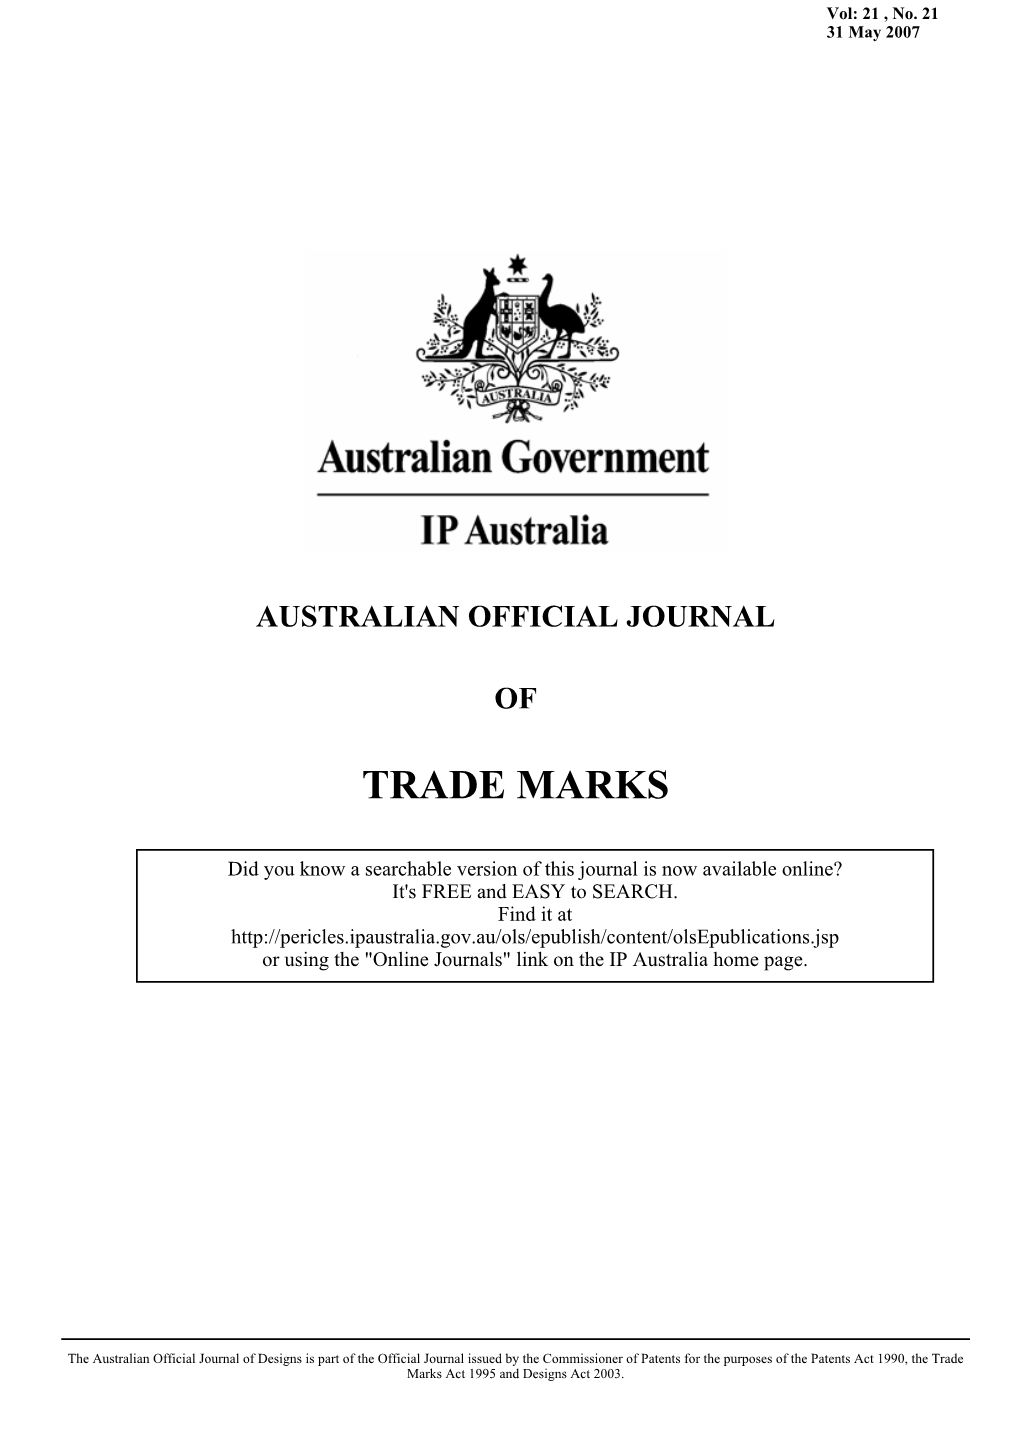 AUSTRALIAN OFFICIAL JOURNAL of TRADE MARKS 31 May 2007